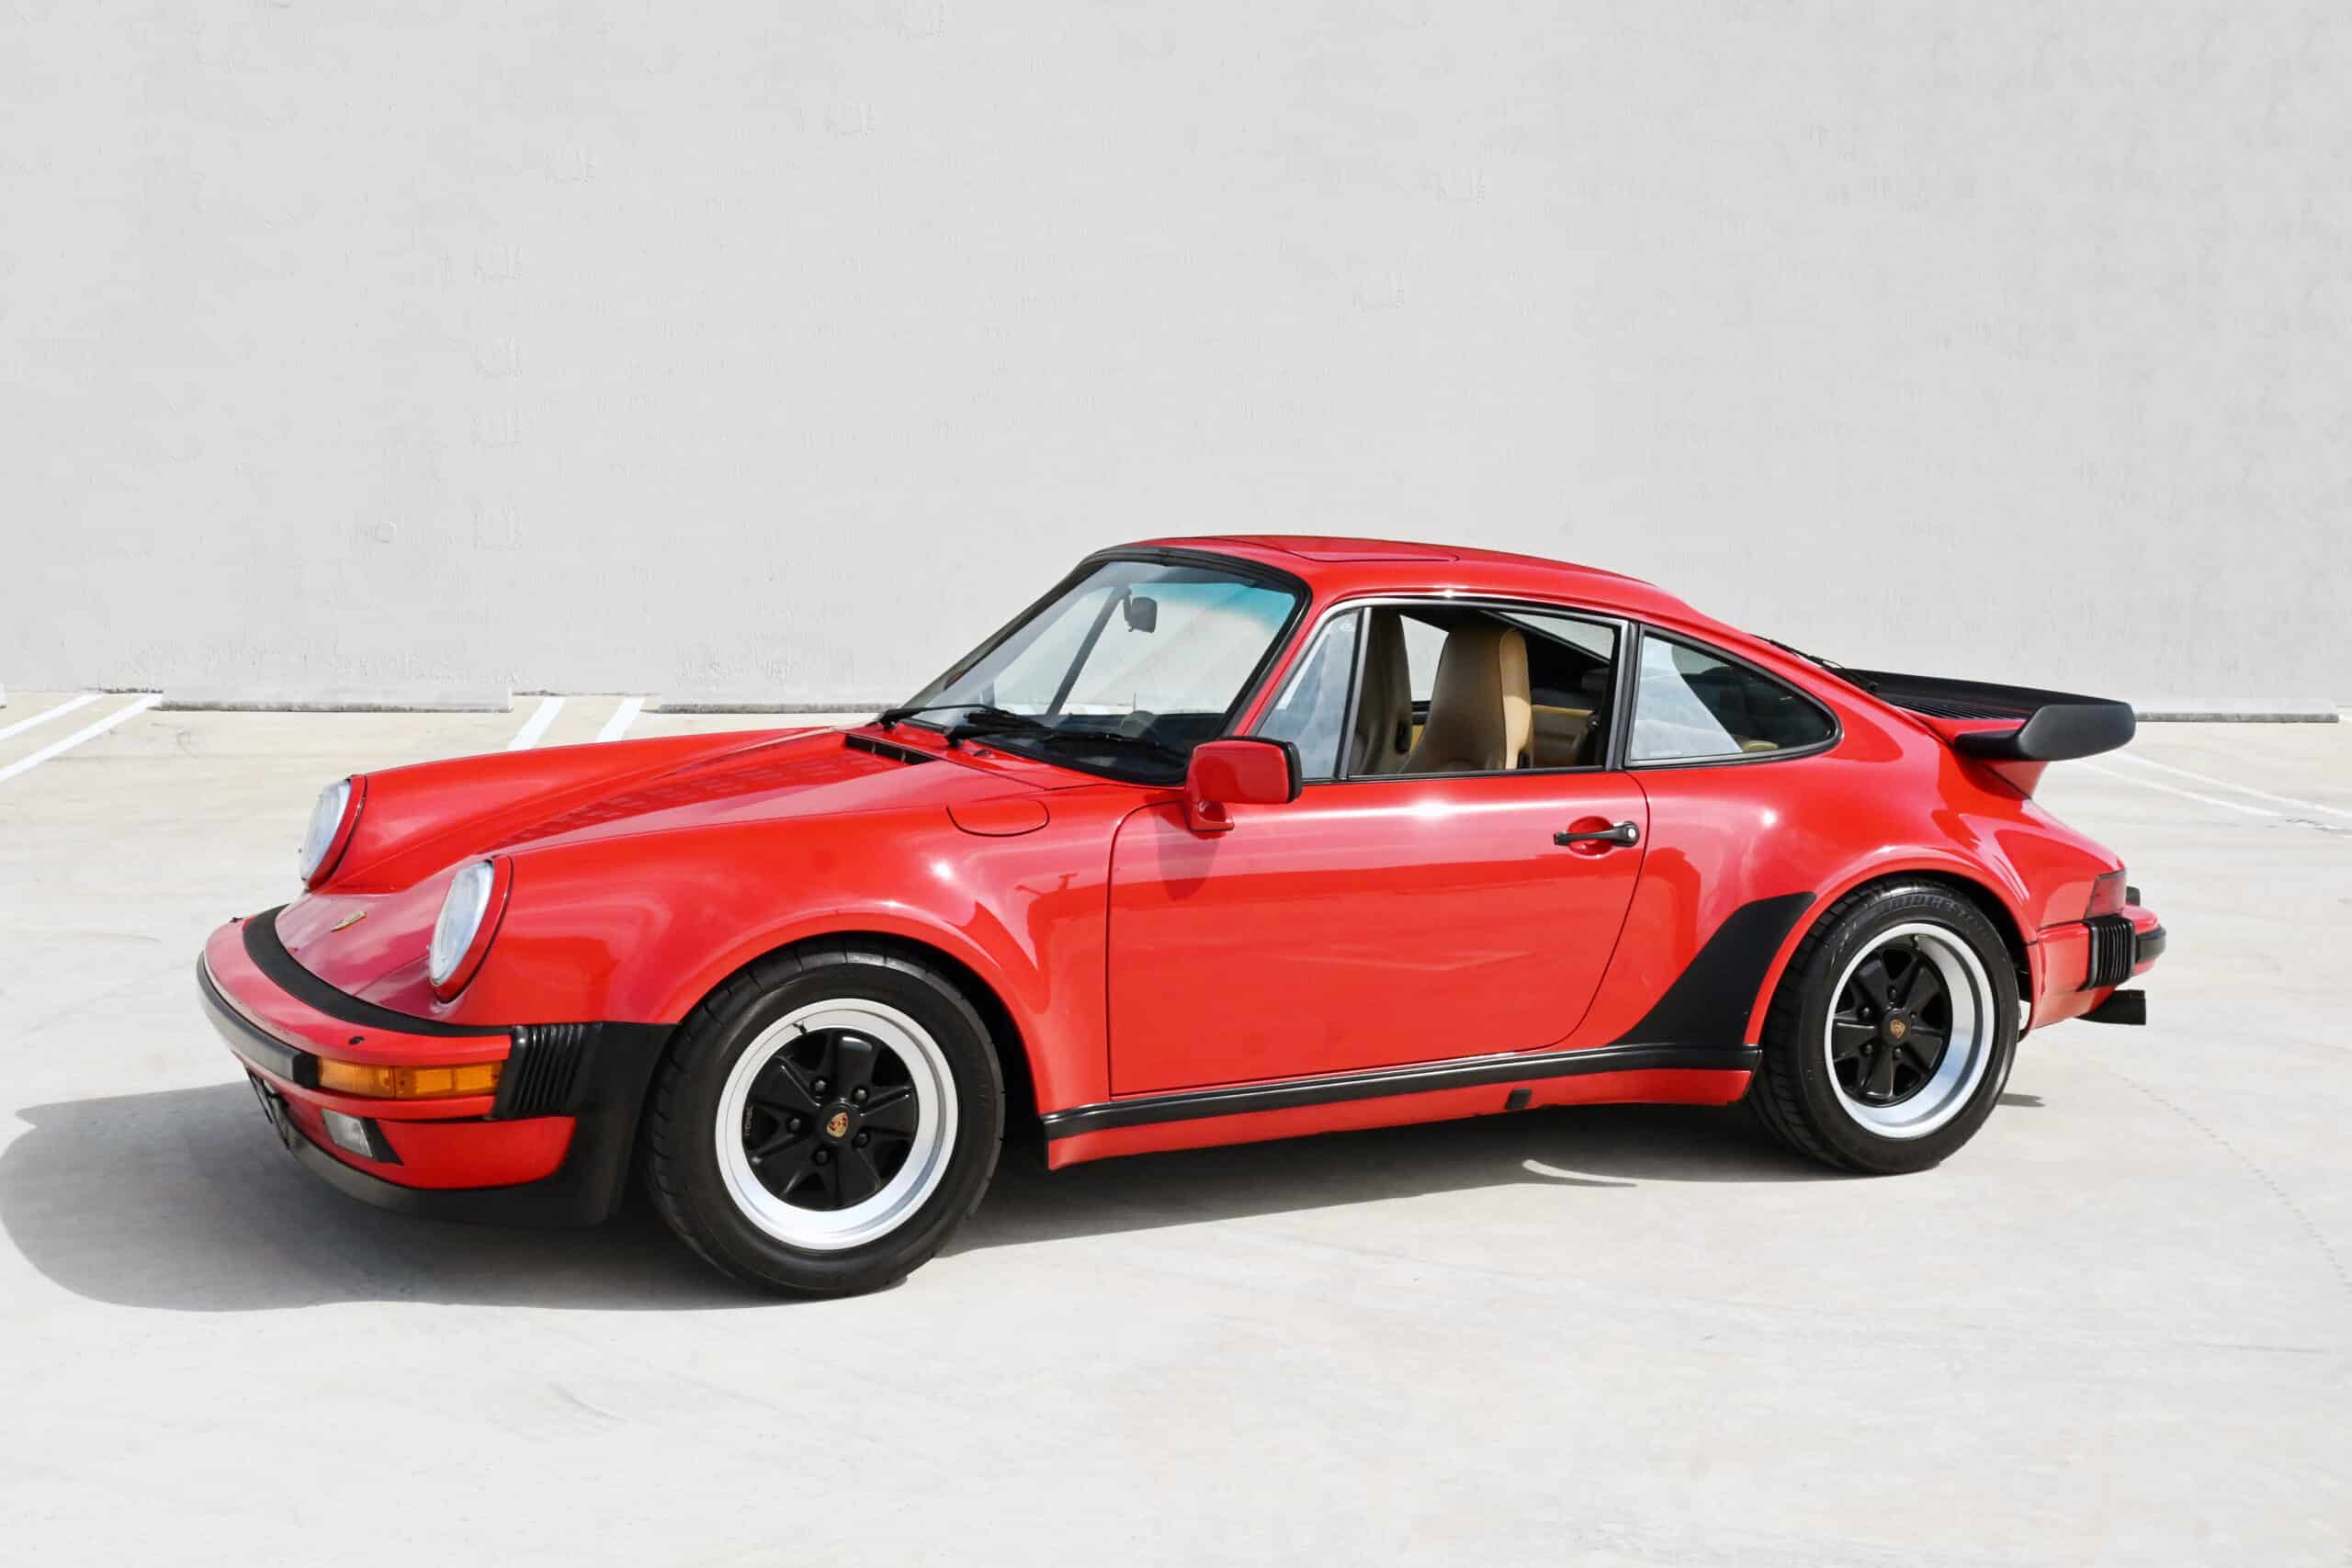 1987 Porsche 930 Turbo Unmodified / Outstanding Condition / Factory LSD / Low Miles / Service Records